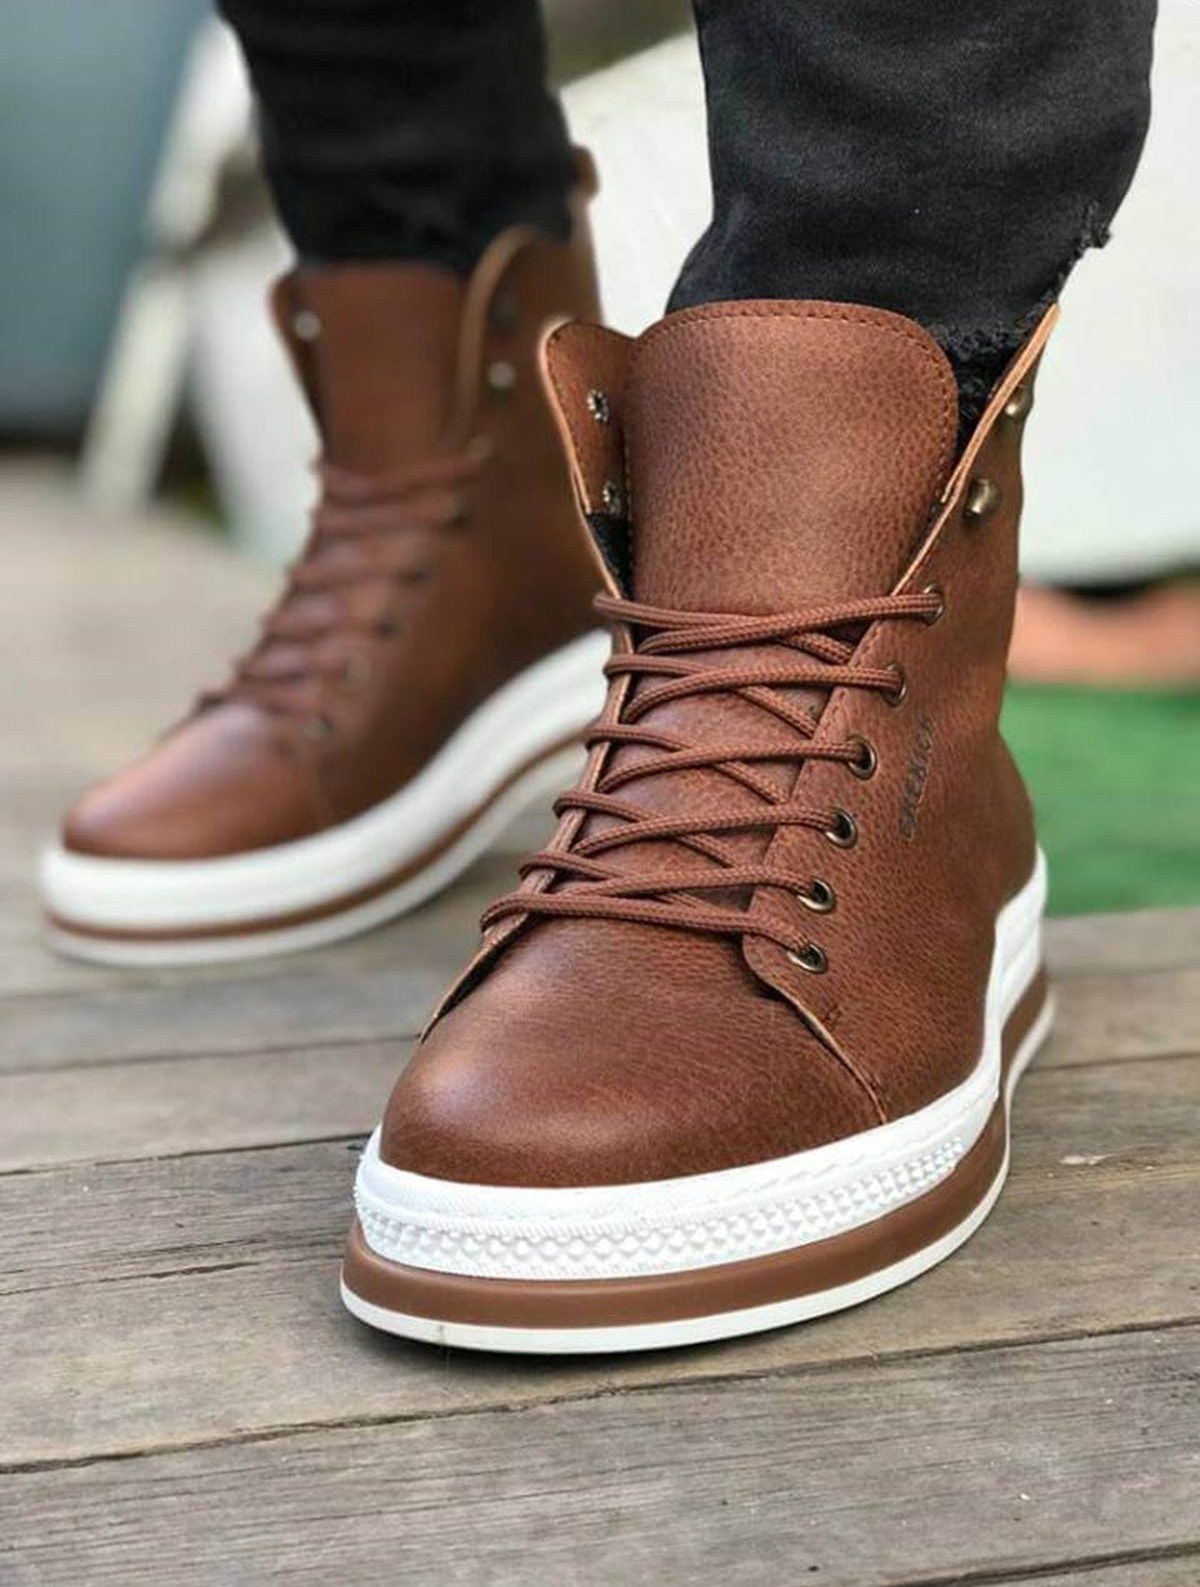 Chekich Boots for Men Claret Red Color Artificial Leather Lace Up Winter Season Shoes Ankle Warm Comfortable High Quality Footwear Gentlemen Basic Odorless Fashion Male Big Sizes Classic Outdoor New-Arrival CH055 V4